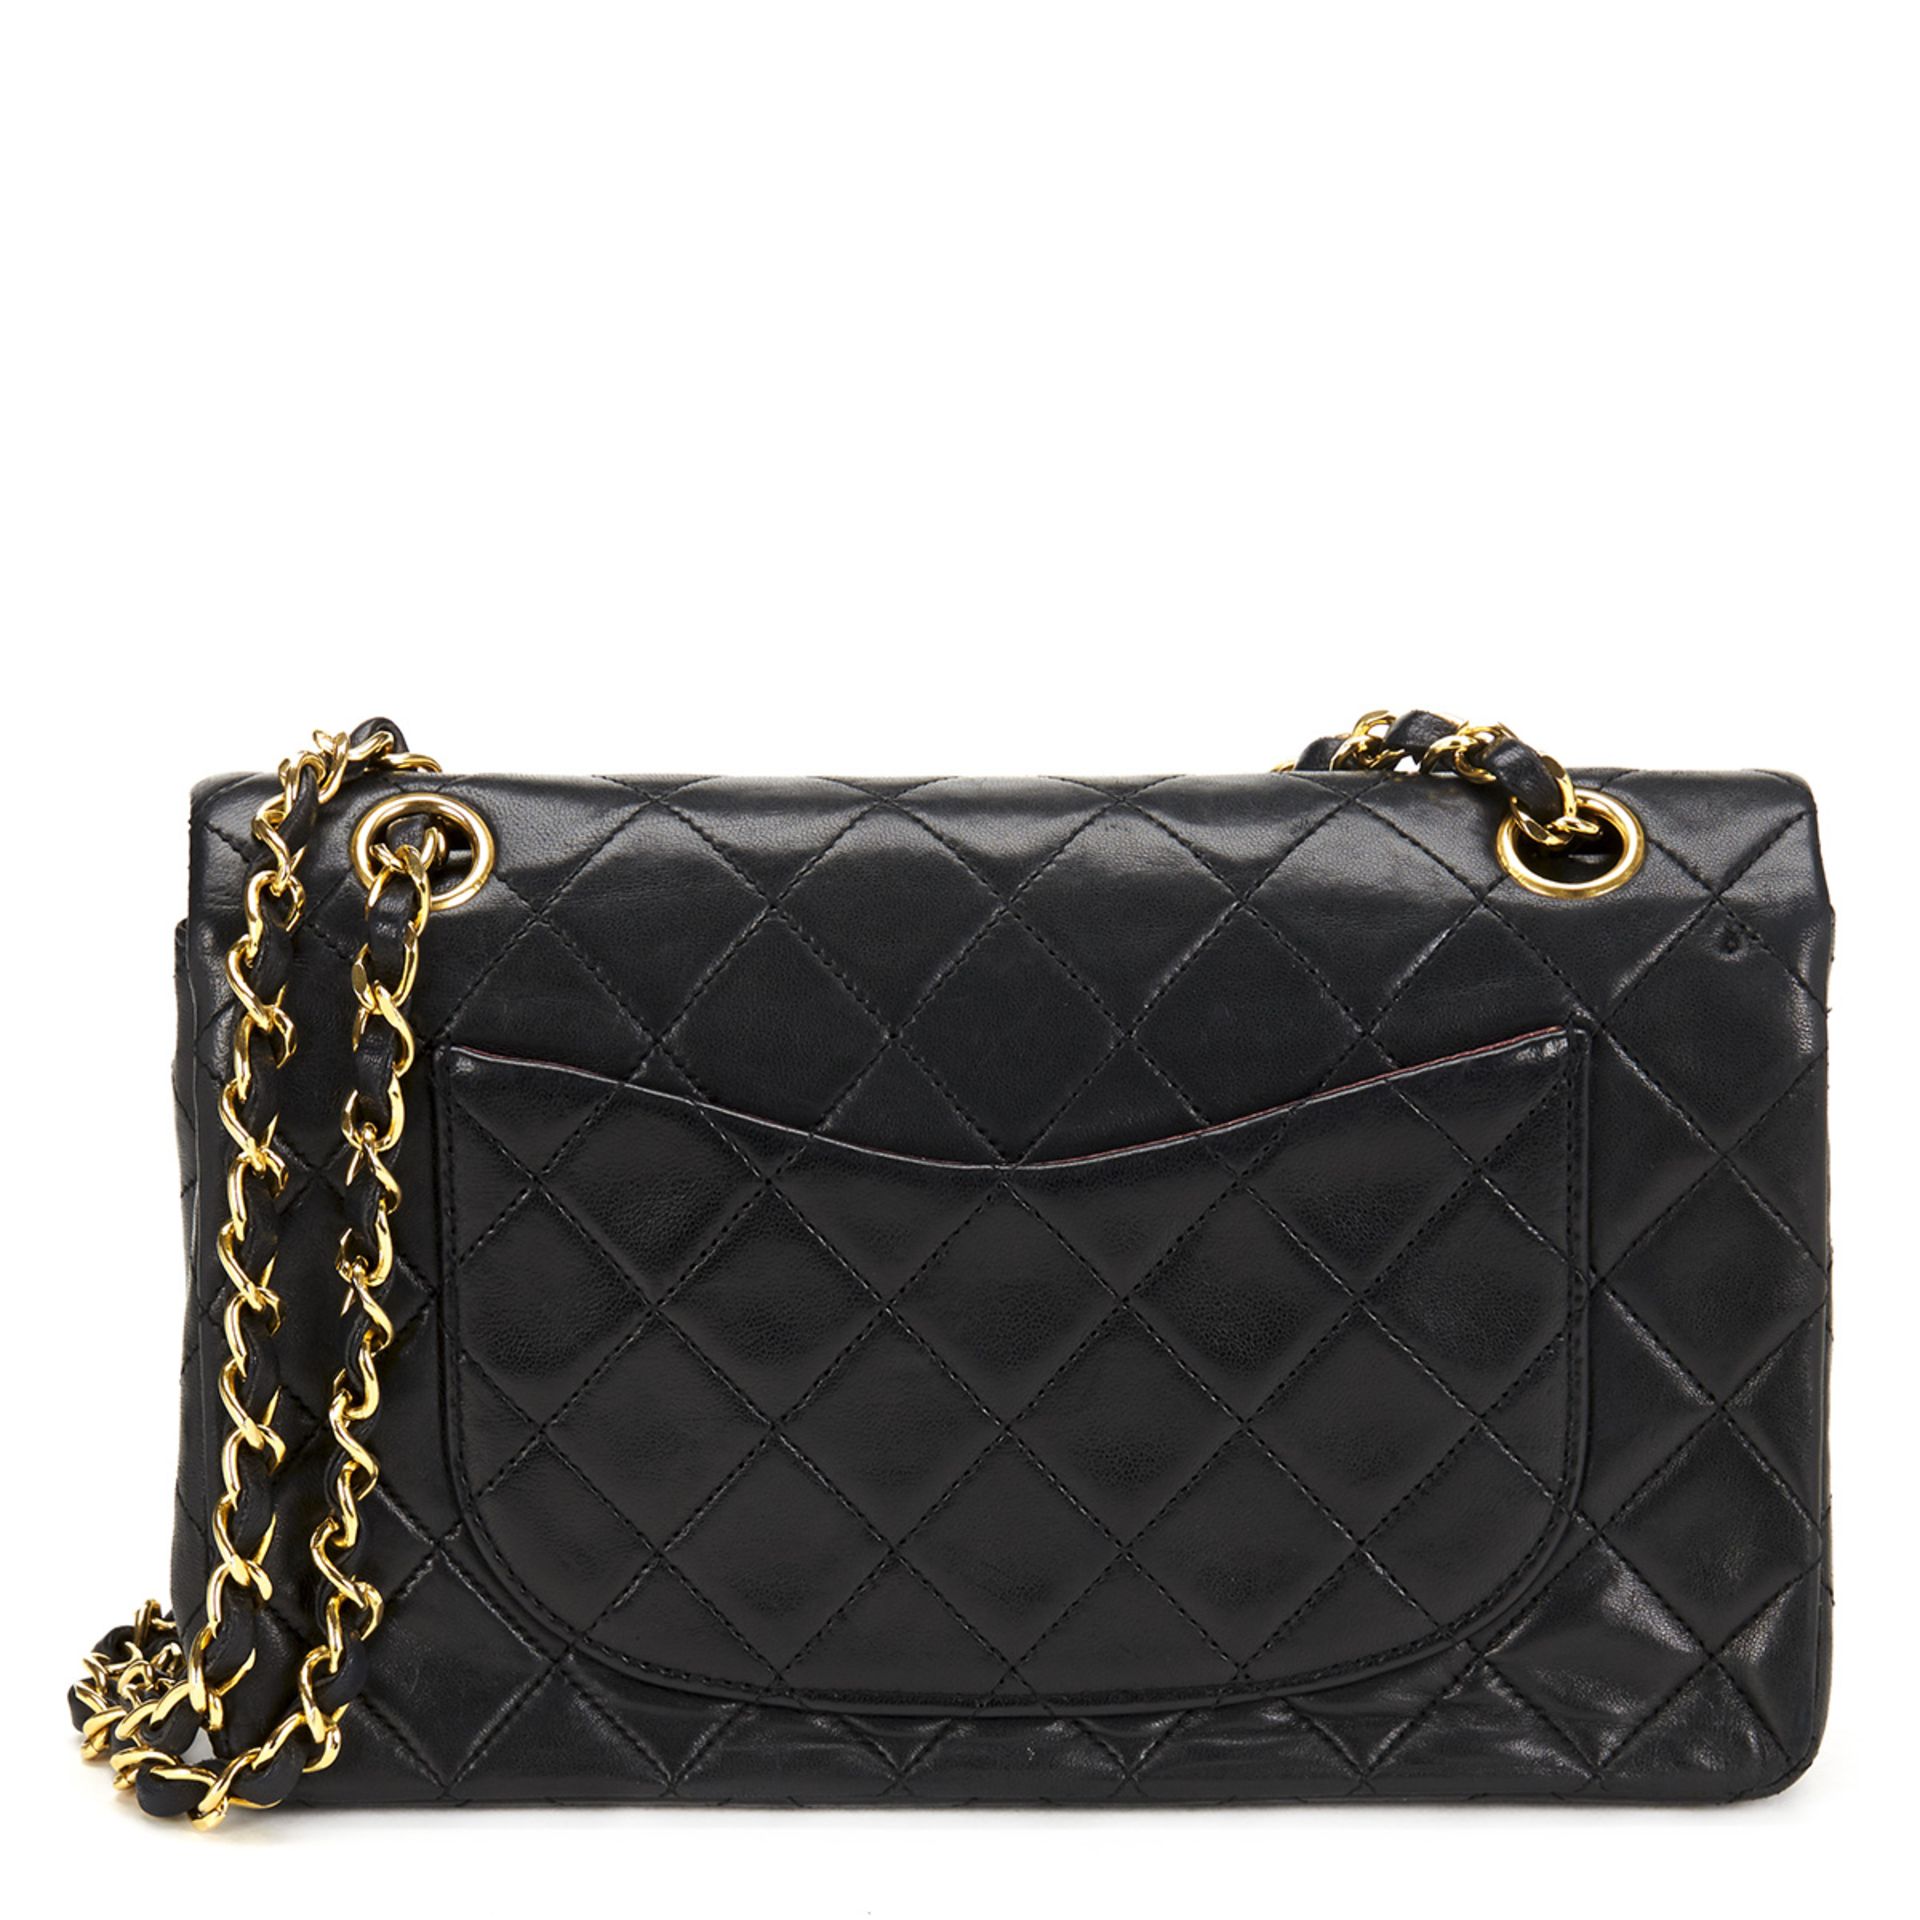 Chanel, Small Classic Double Flap Bag - Image 4 of 10